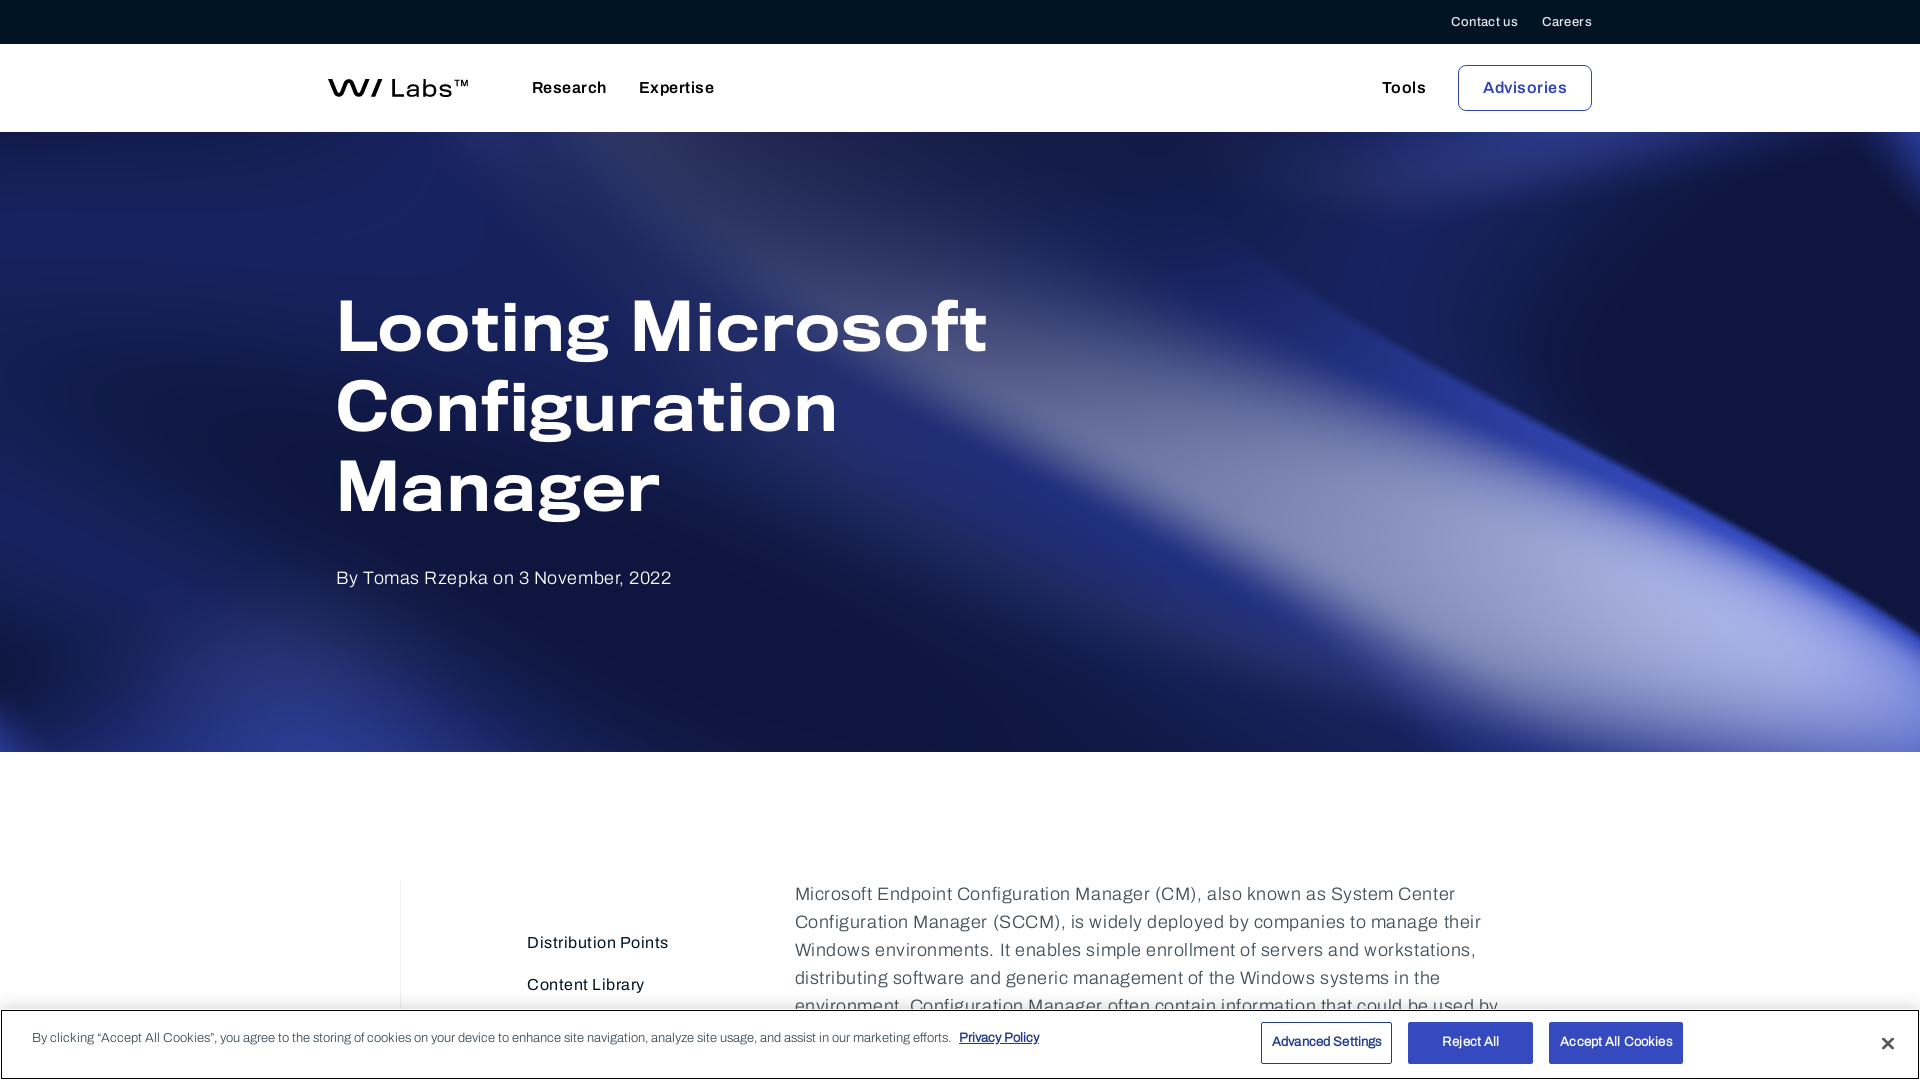 Looting Microsoft Configuration Manager | WithSecure™ Labs